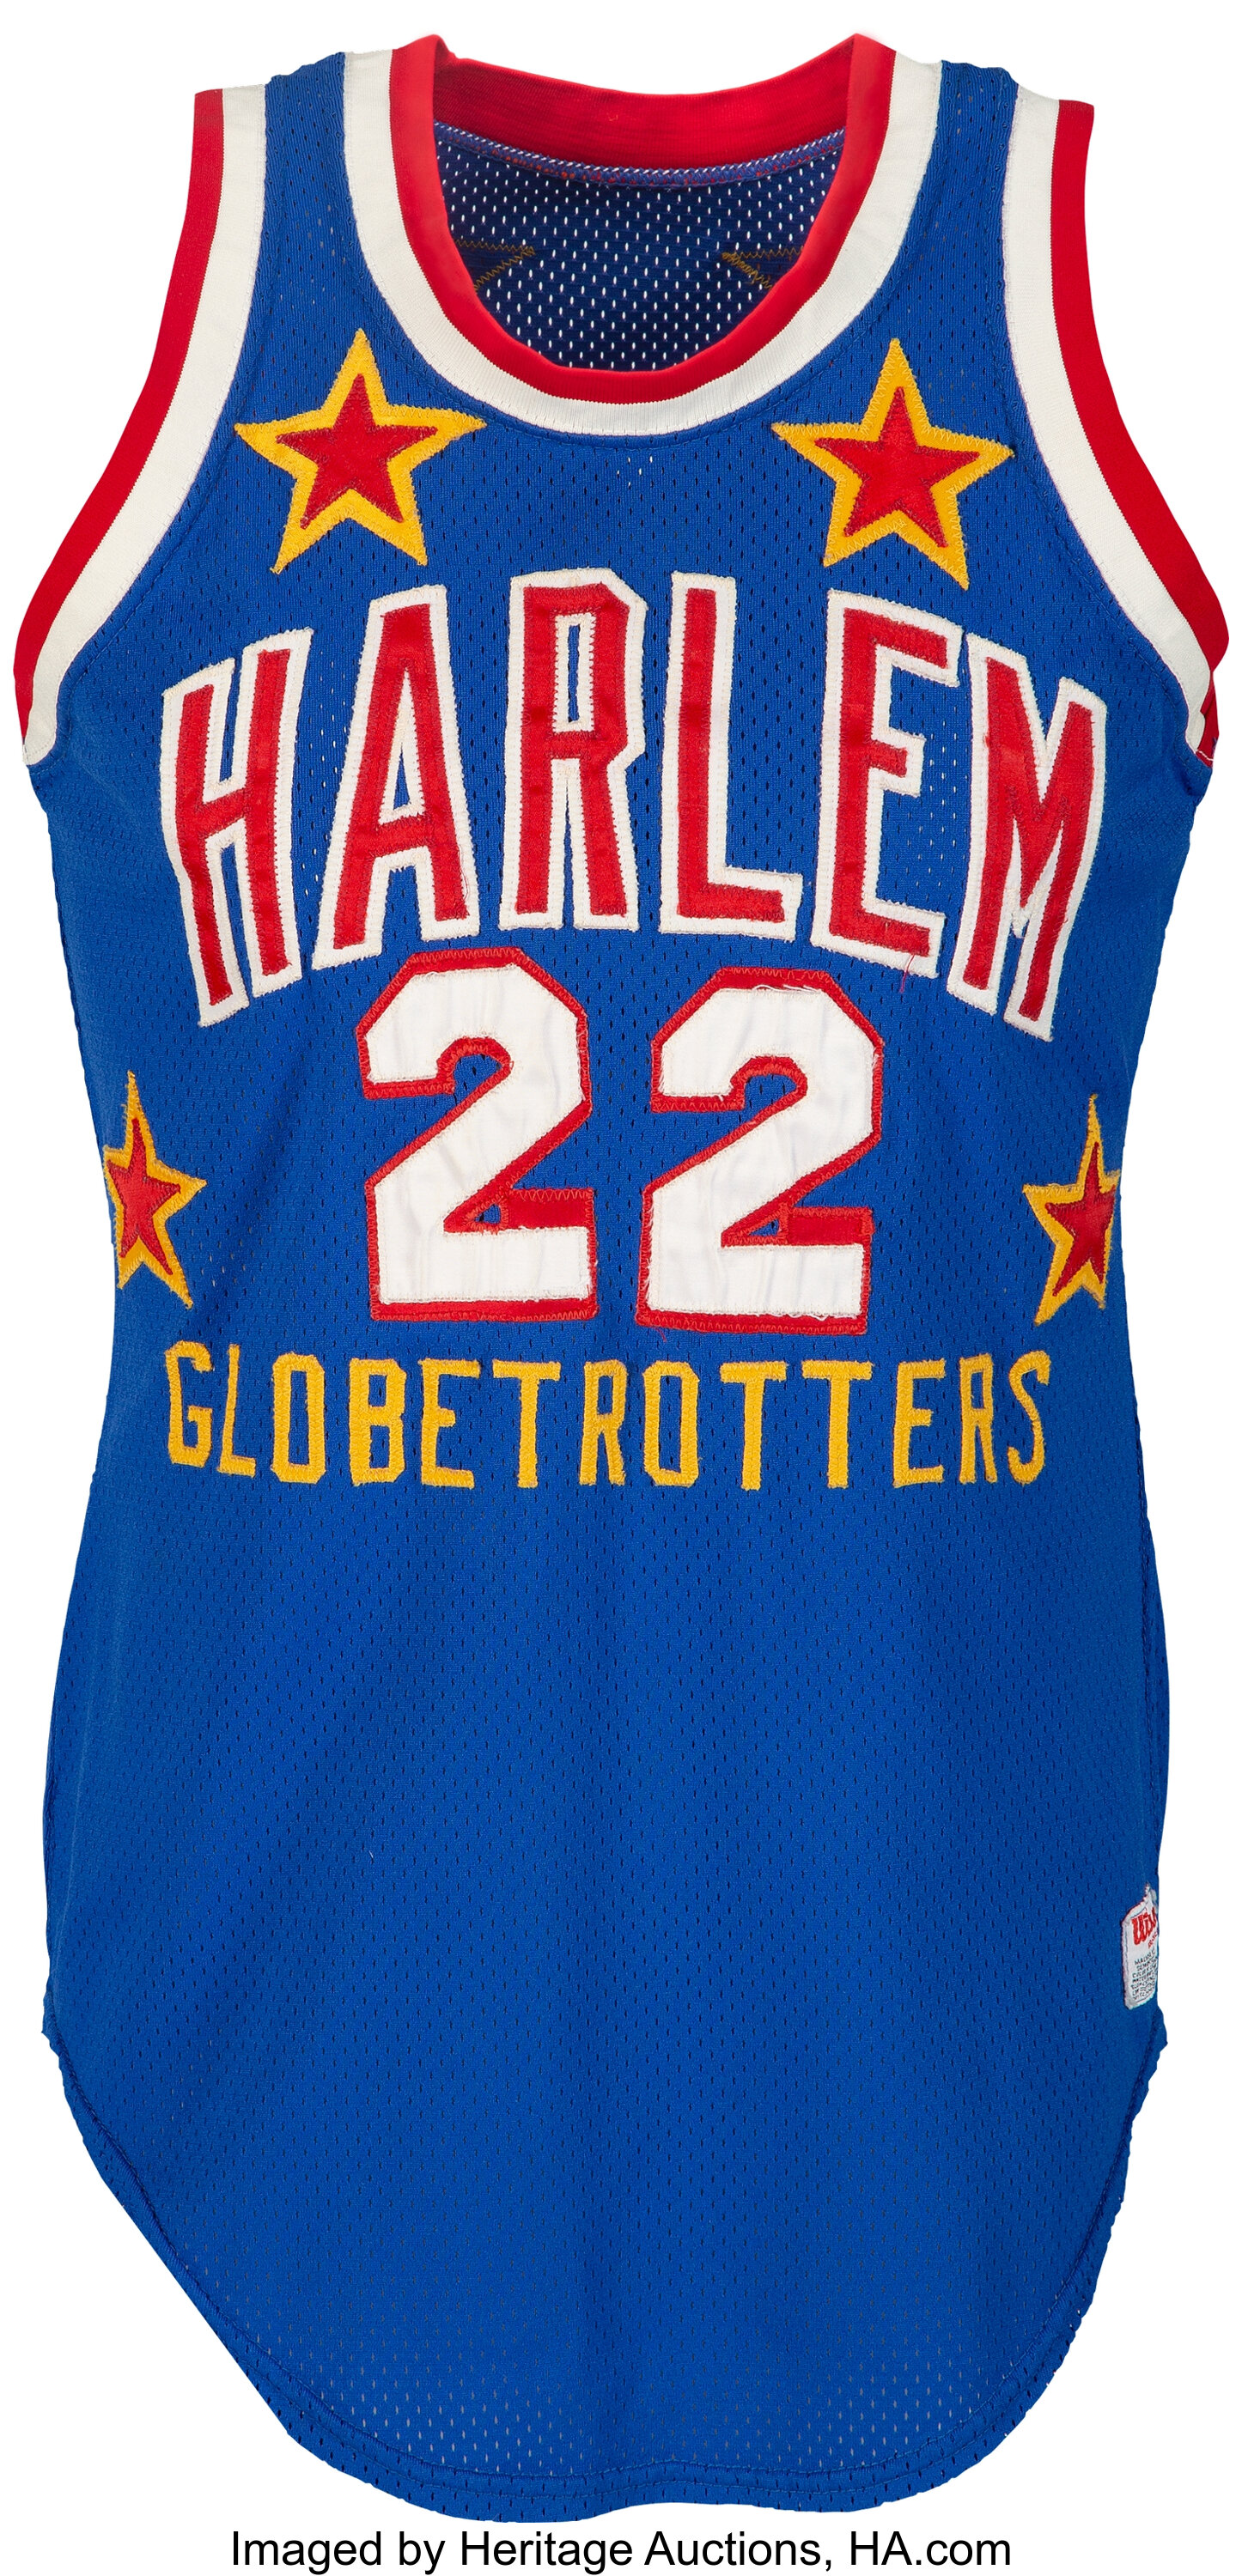 Jersey worn by Curly Neal for the Harlem Globetrotters